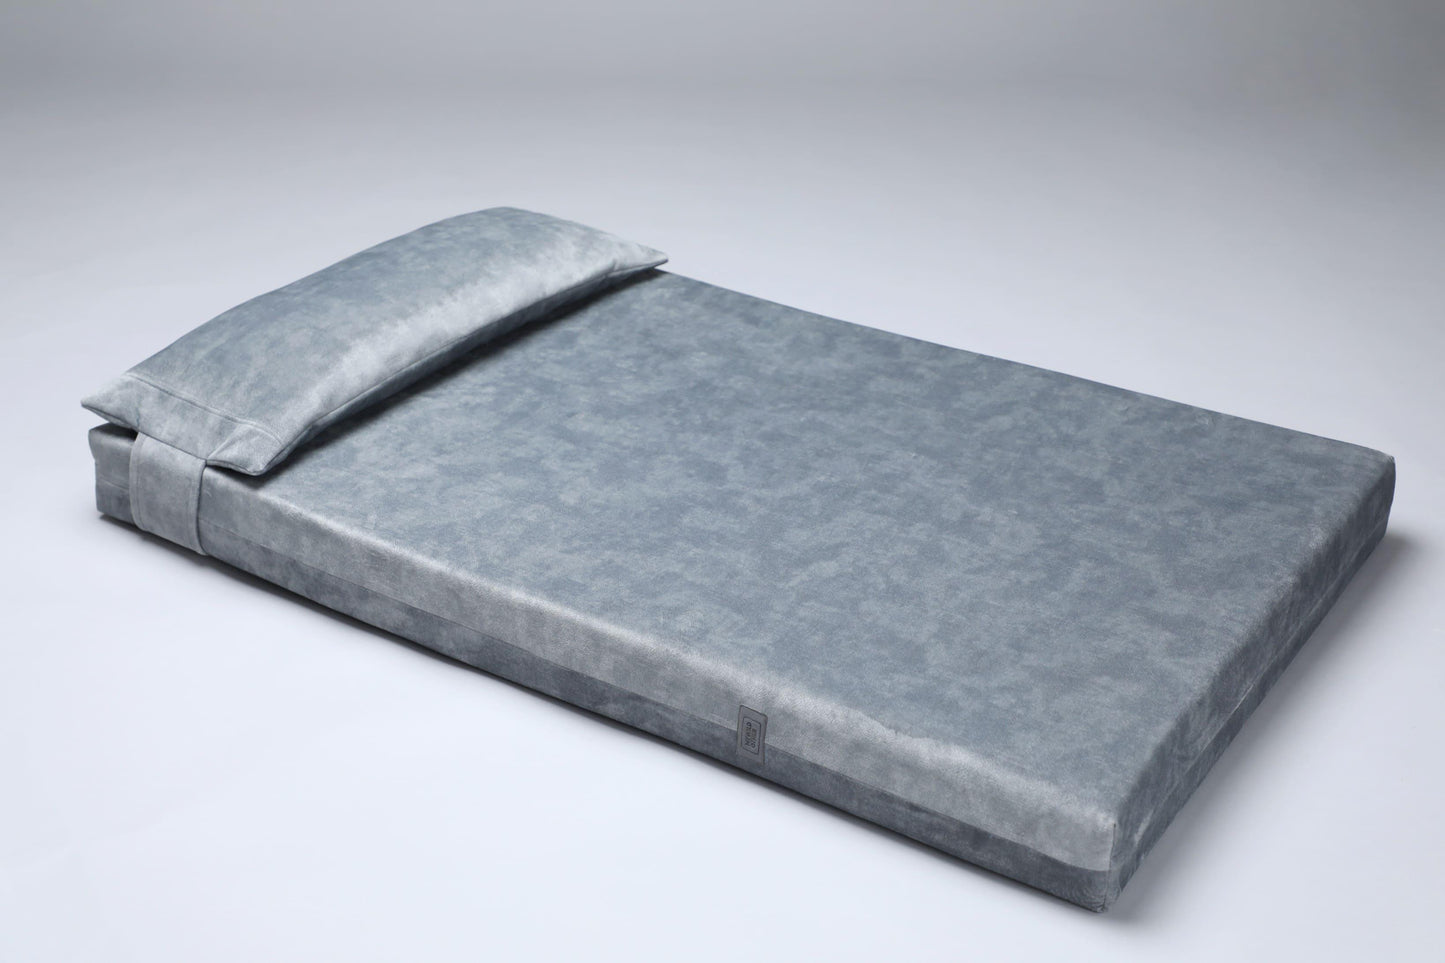 Dog bed for large dogs | Extra comfort & support | 2-sided | METAL GREY - premium dog goods handmade in Europe by animalistus